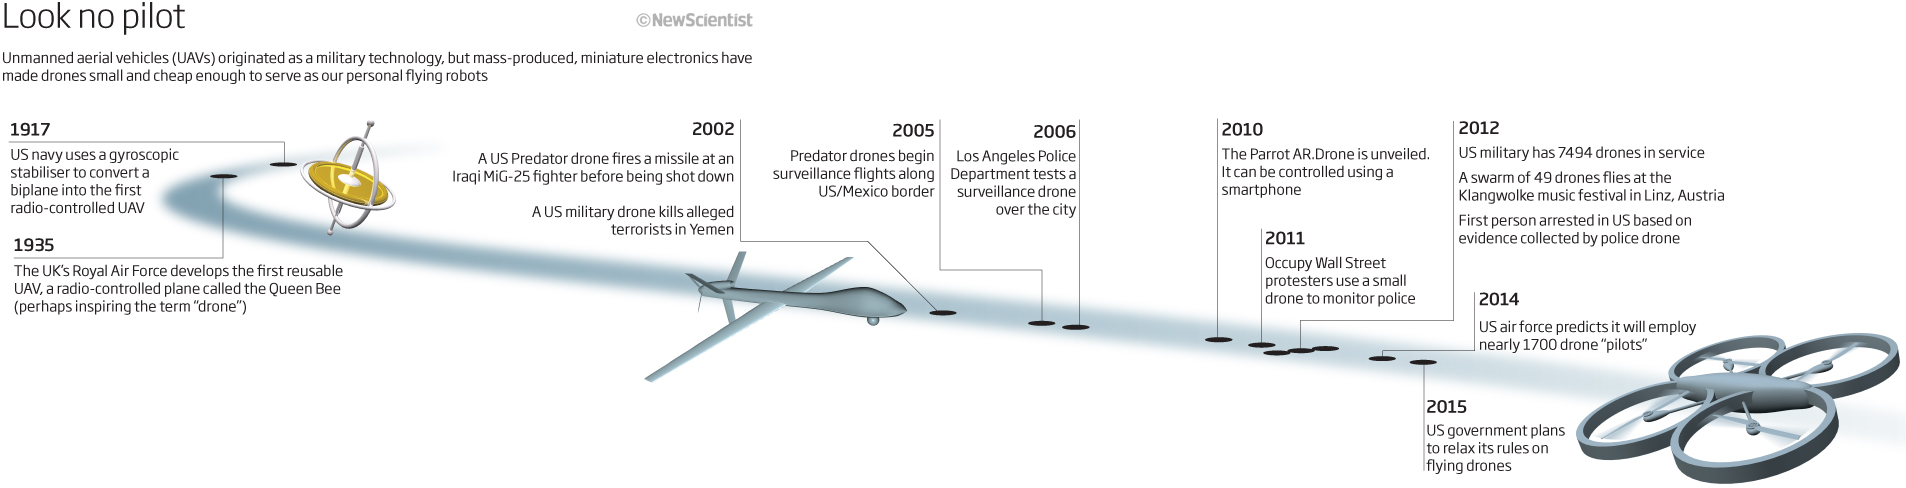 timeline showing the evolution of UAVs and drones